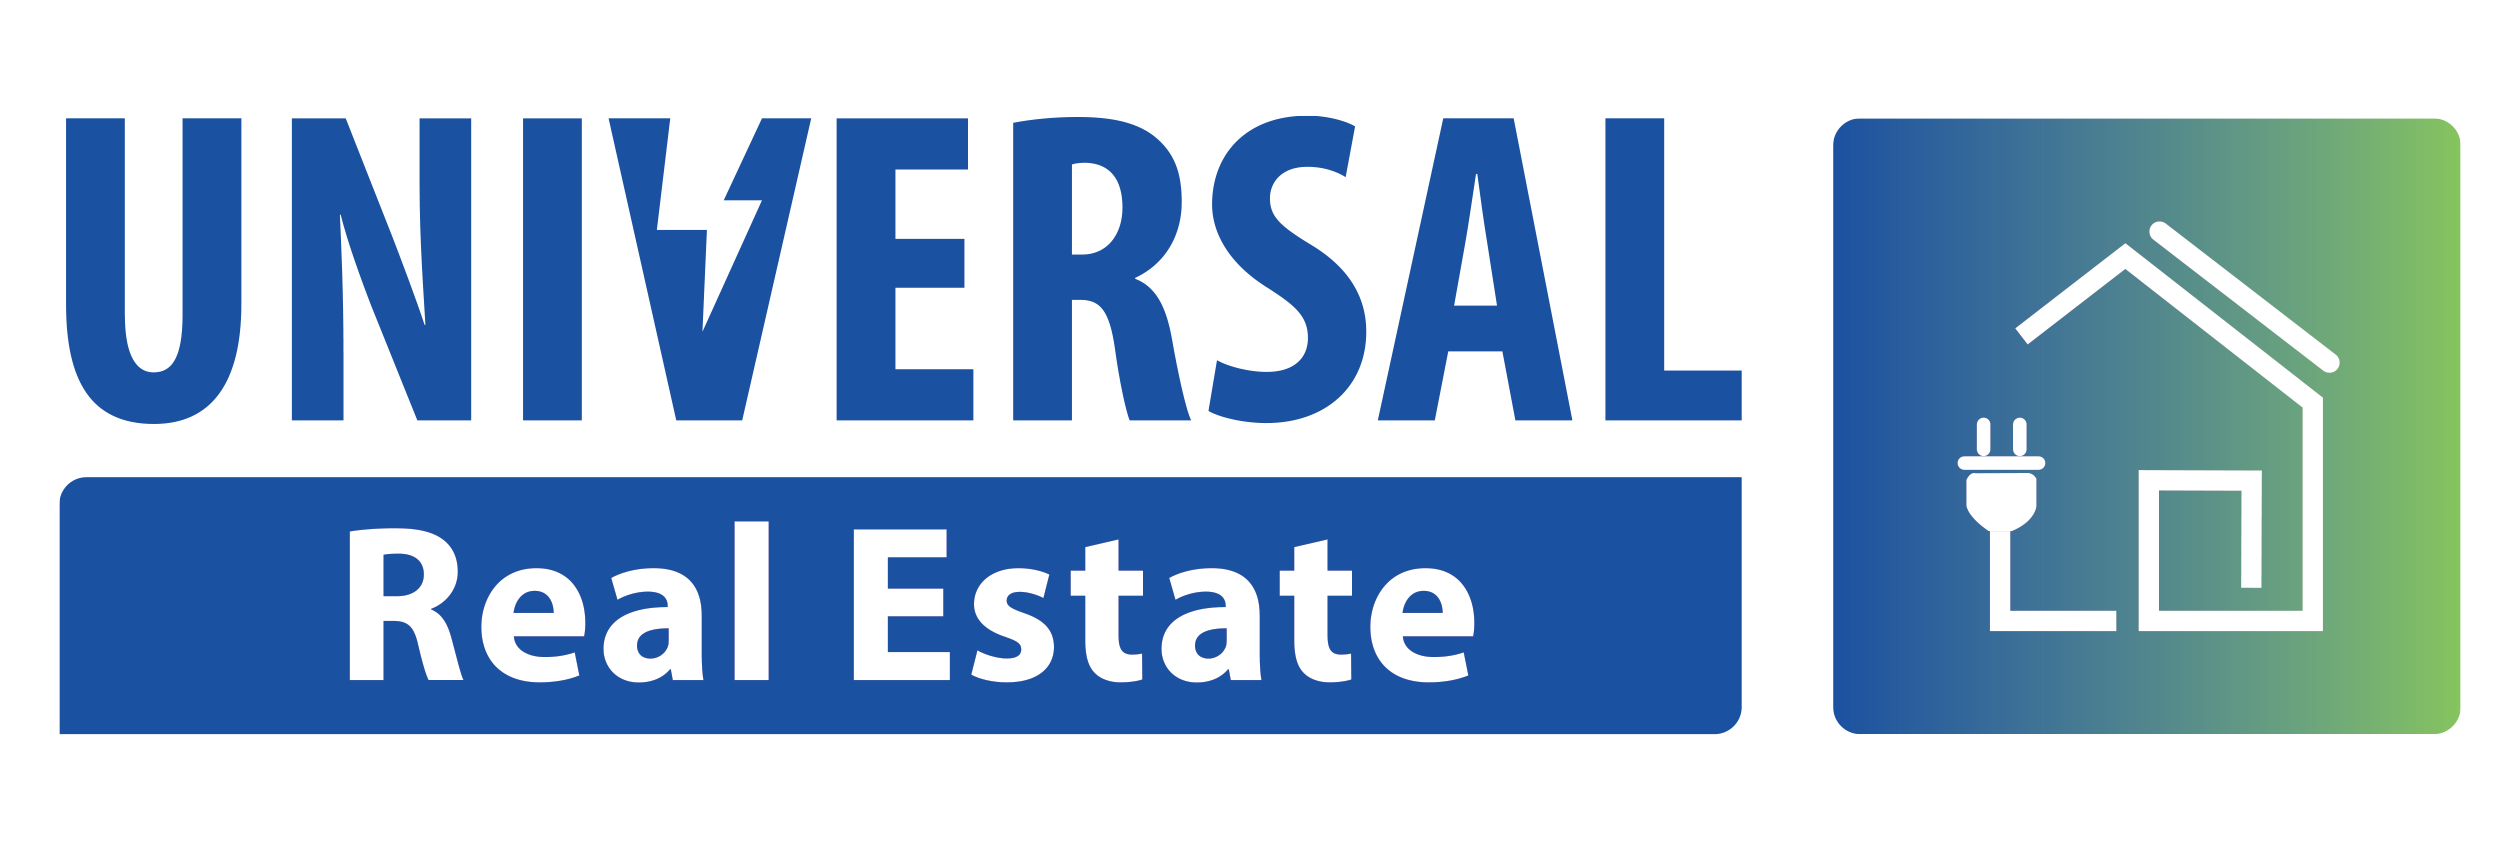 Universal Real Estate – A Division of Universal Green Group